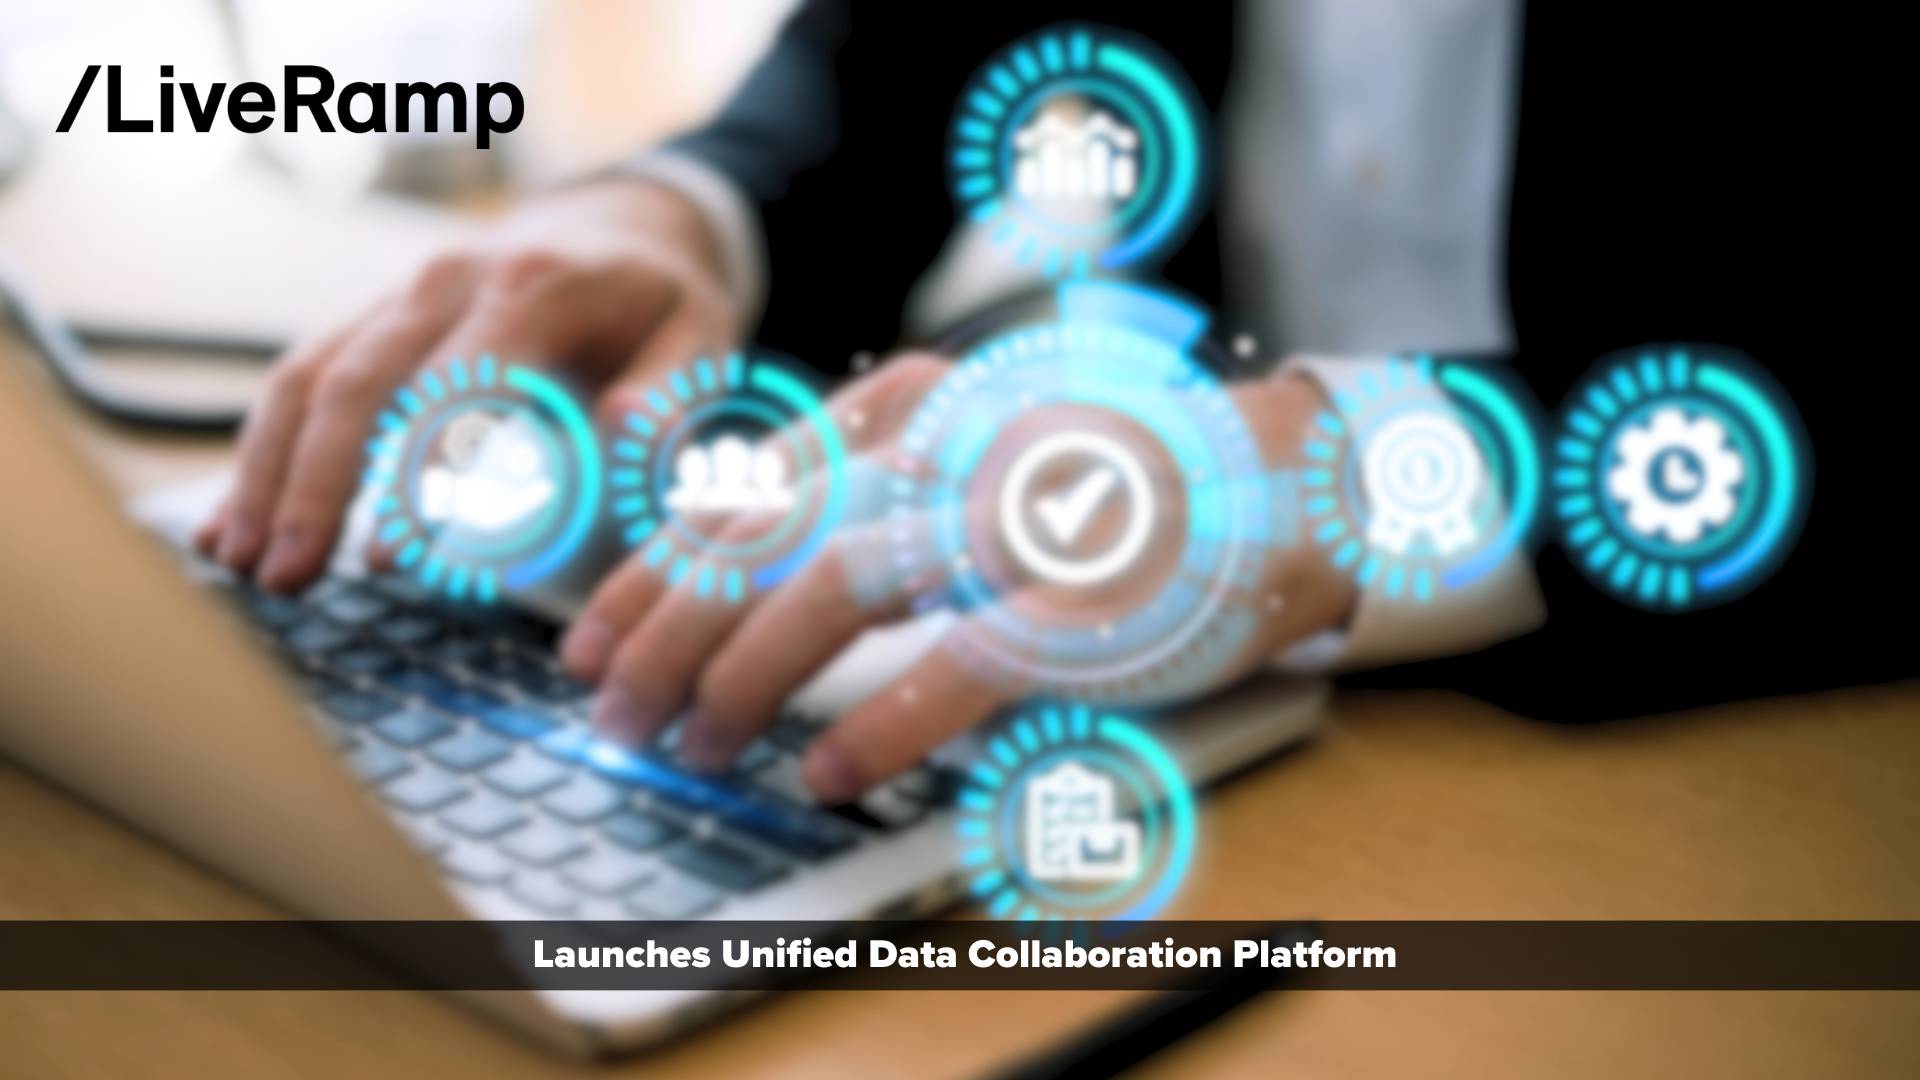 LiveRamp Launches Unified Data Collaboration Platform Featuring Composable Technology